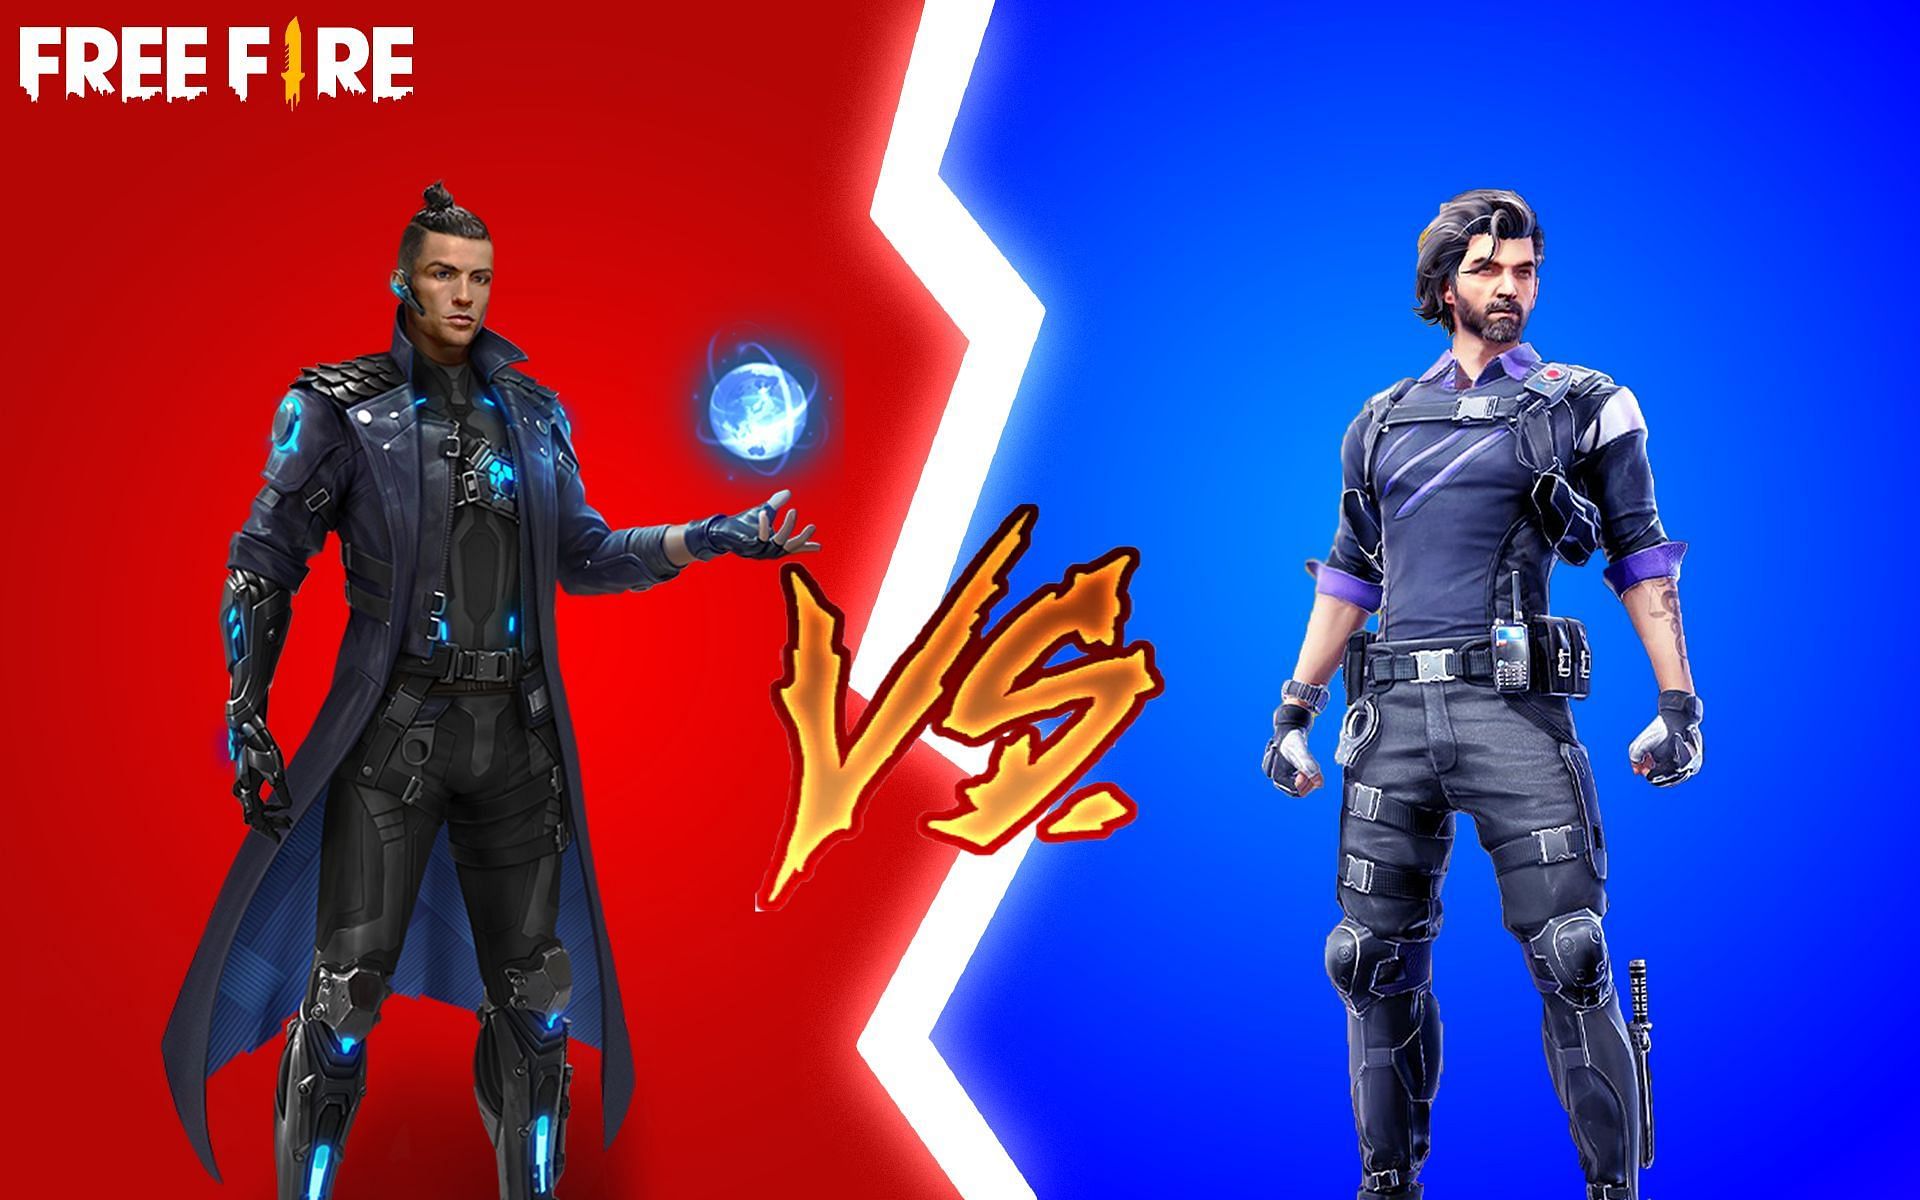 Chrono vs Elite Andrew: Which Free Fire character is more powerful? (Image via Sportskeeda)